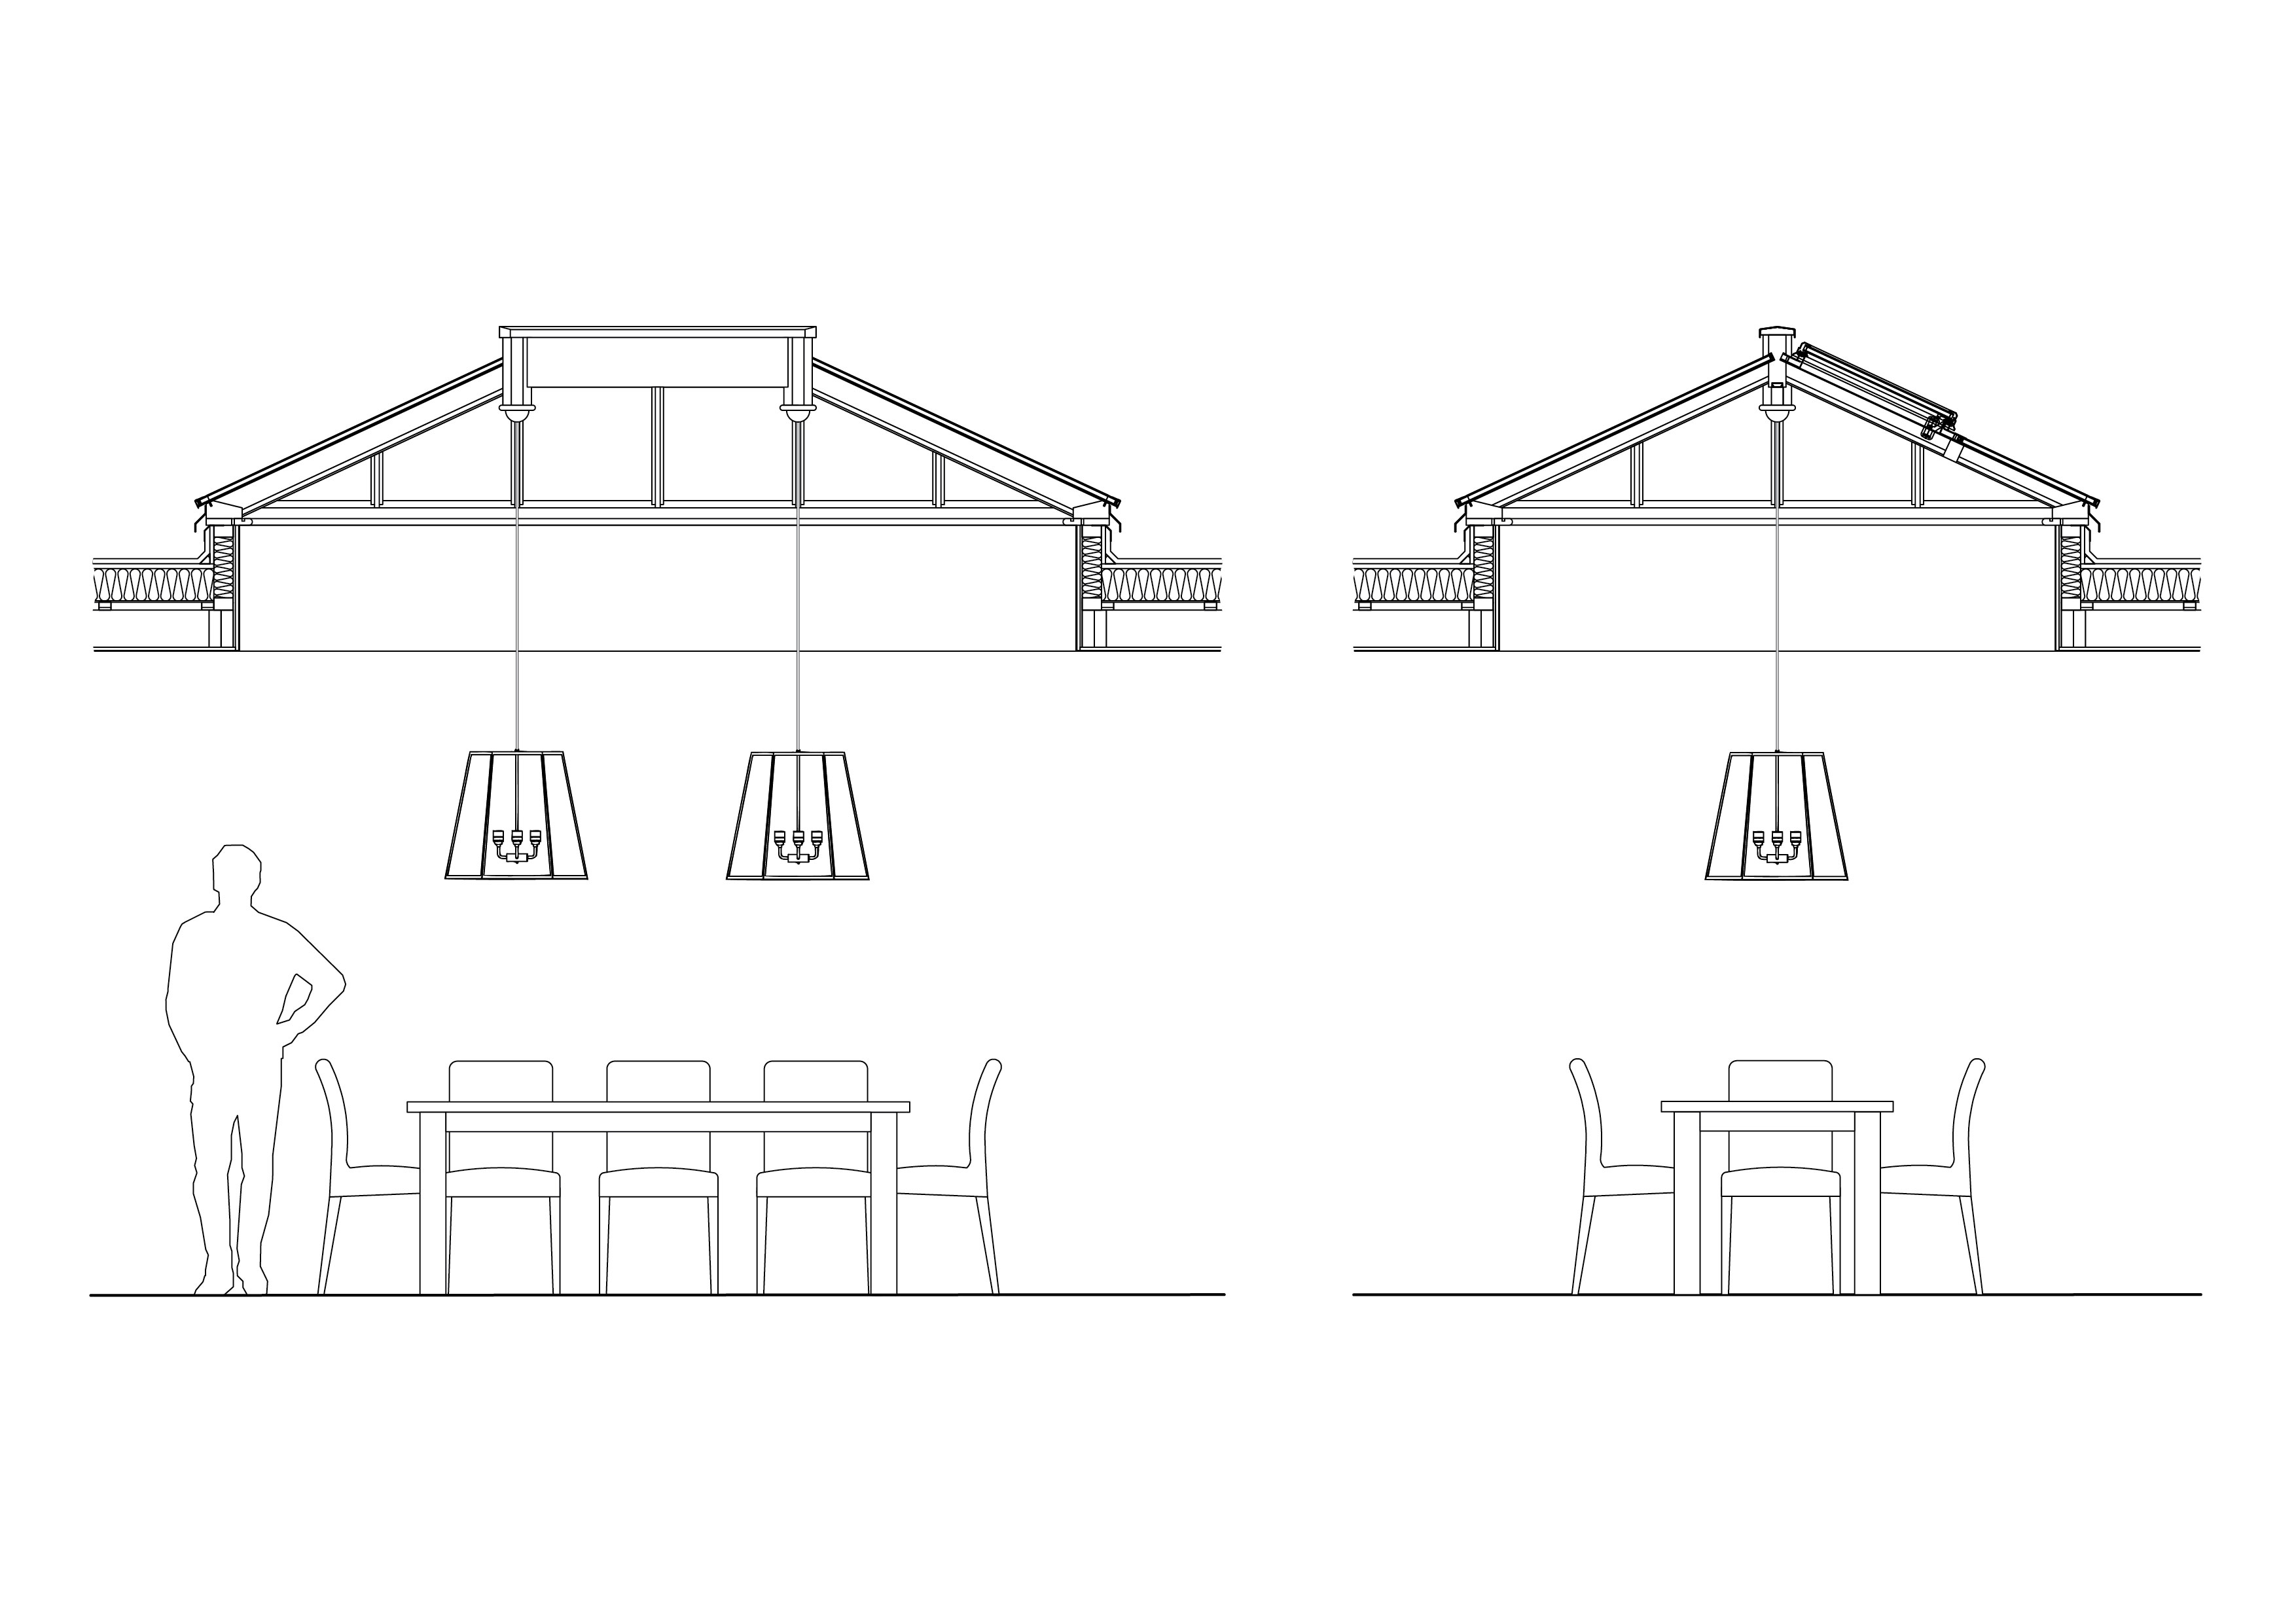 Section drawings showing pendant lights hanging from roof lantern